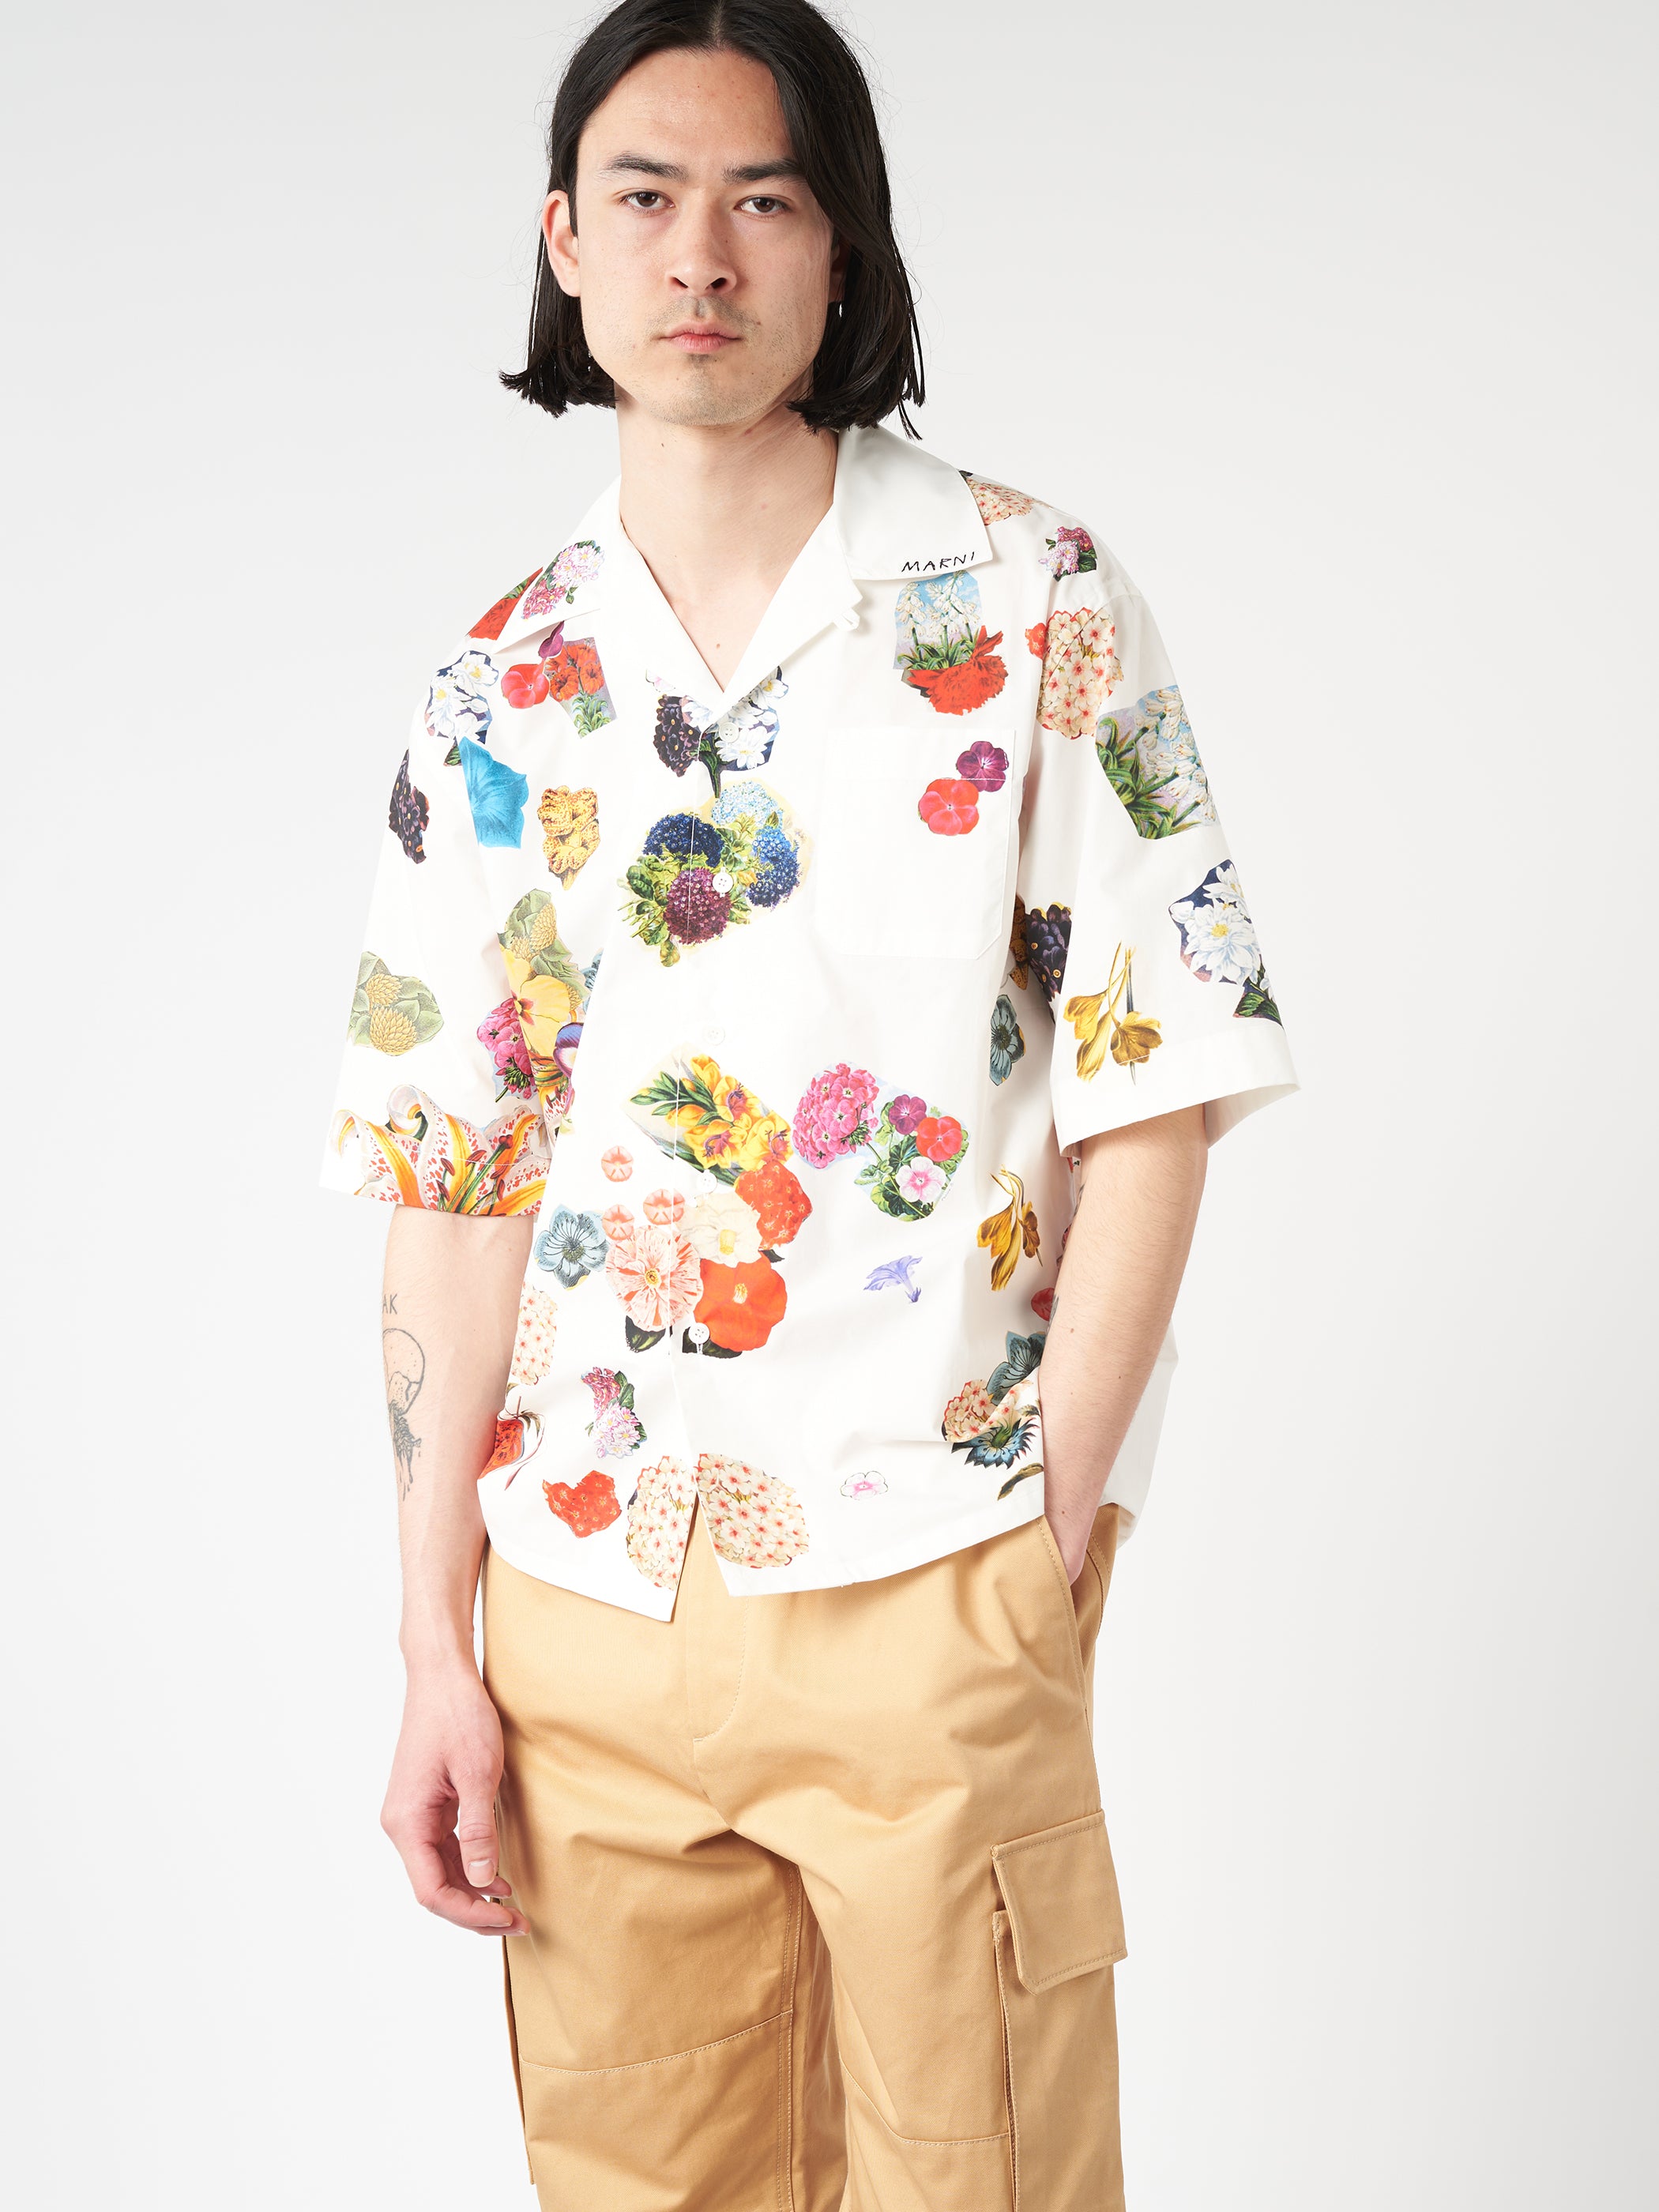 Bowling Shirt with Flower Prints